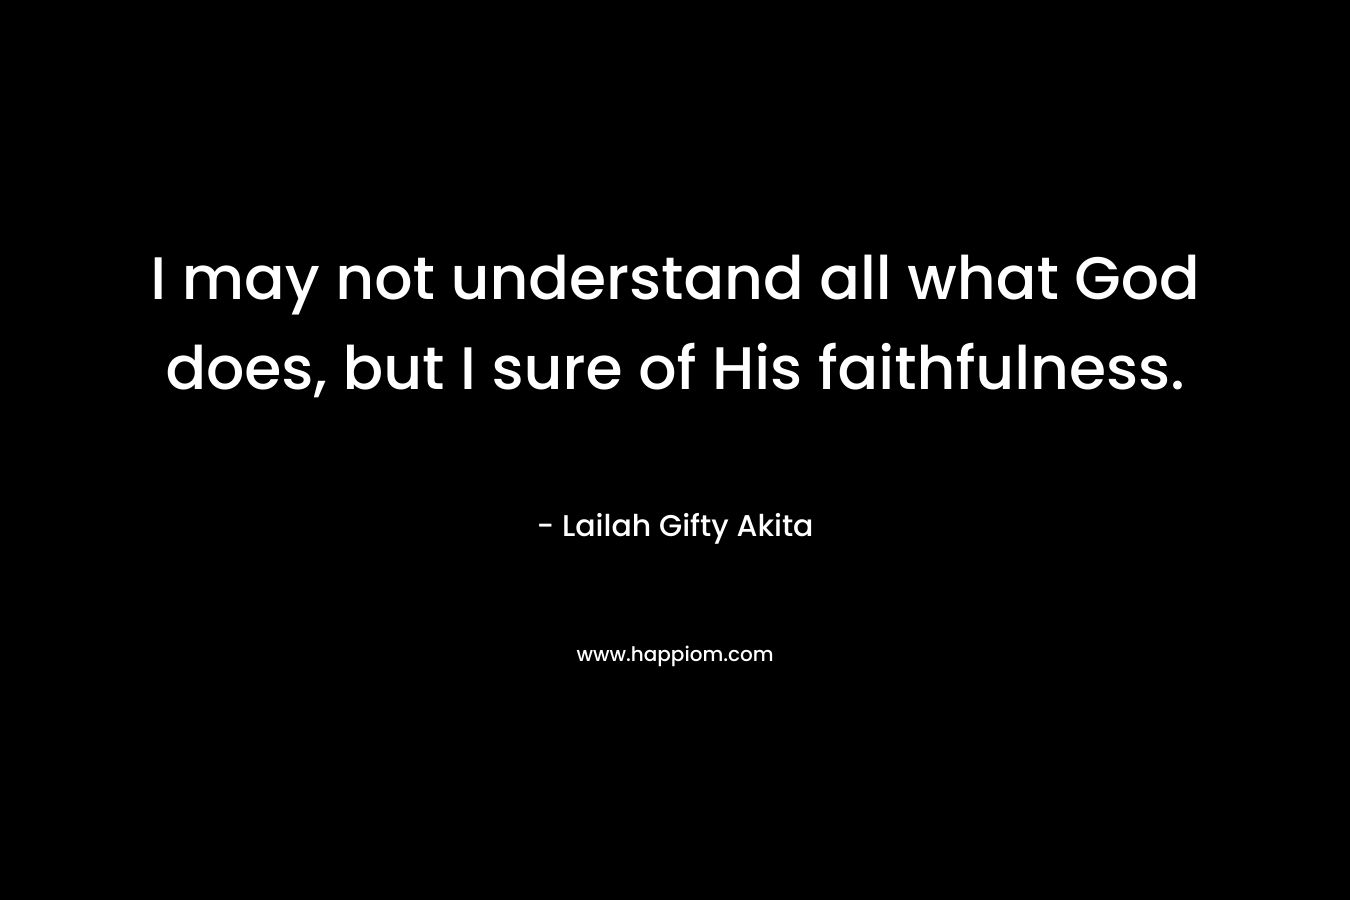 I may not understand all what God does, but I sure of His faithfulness.